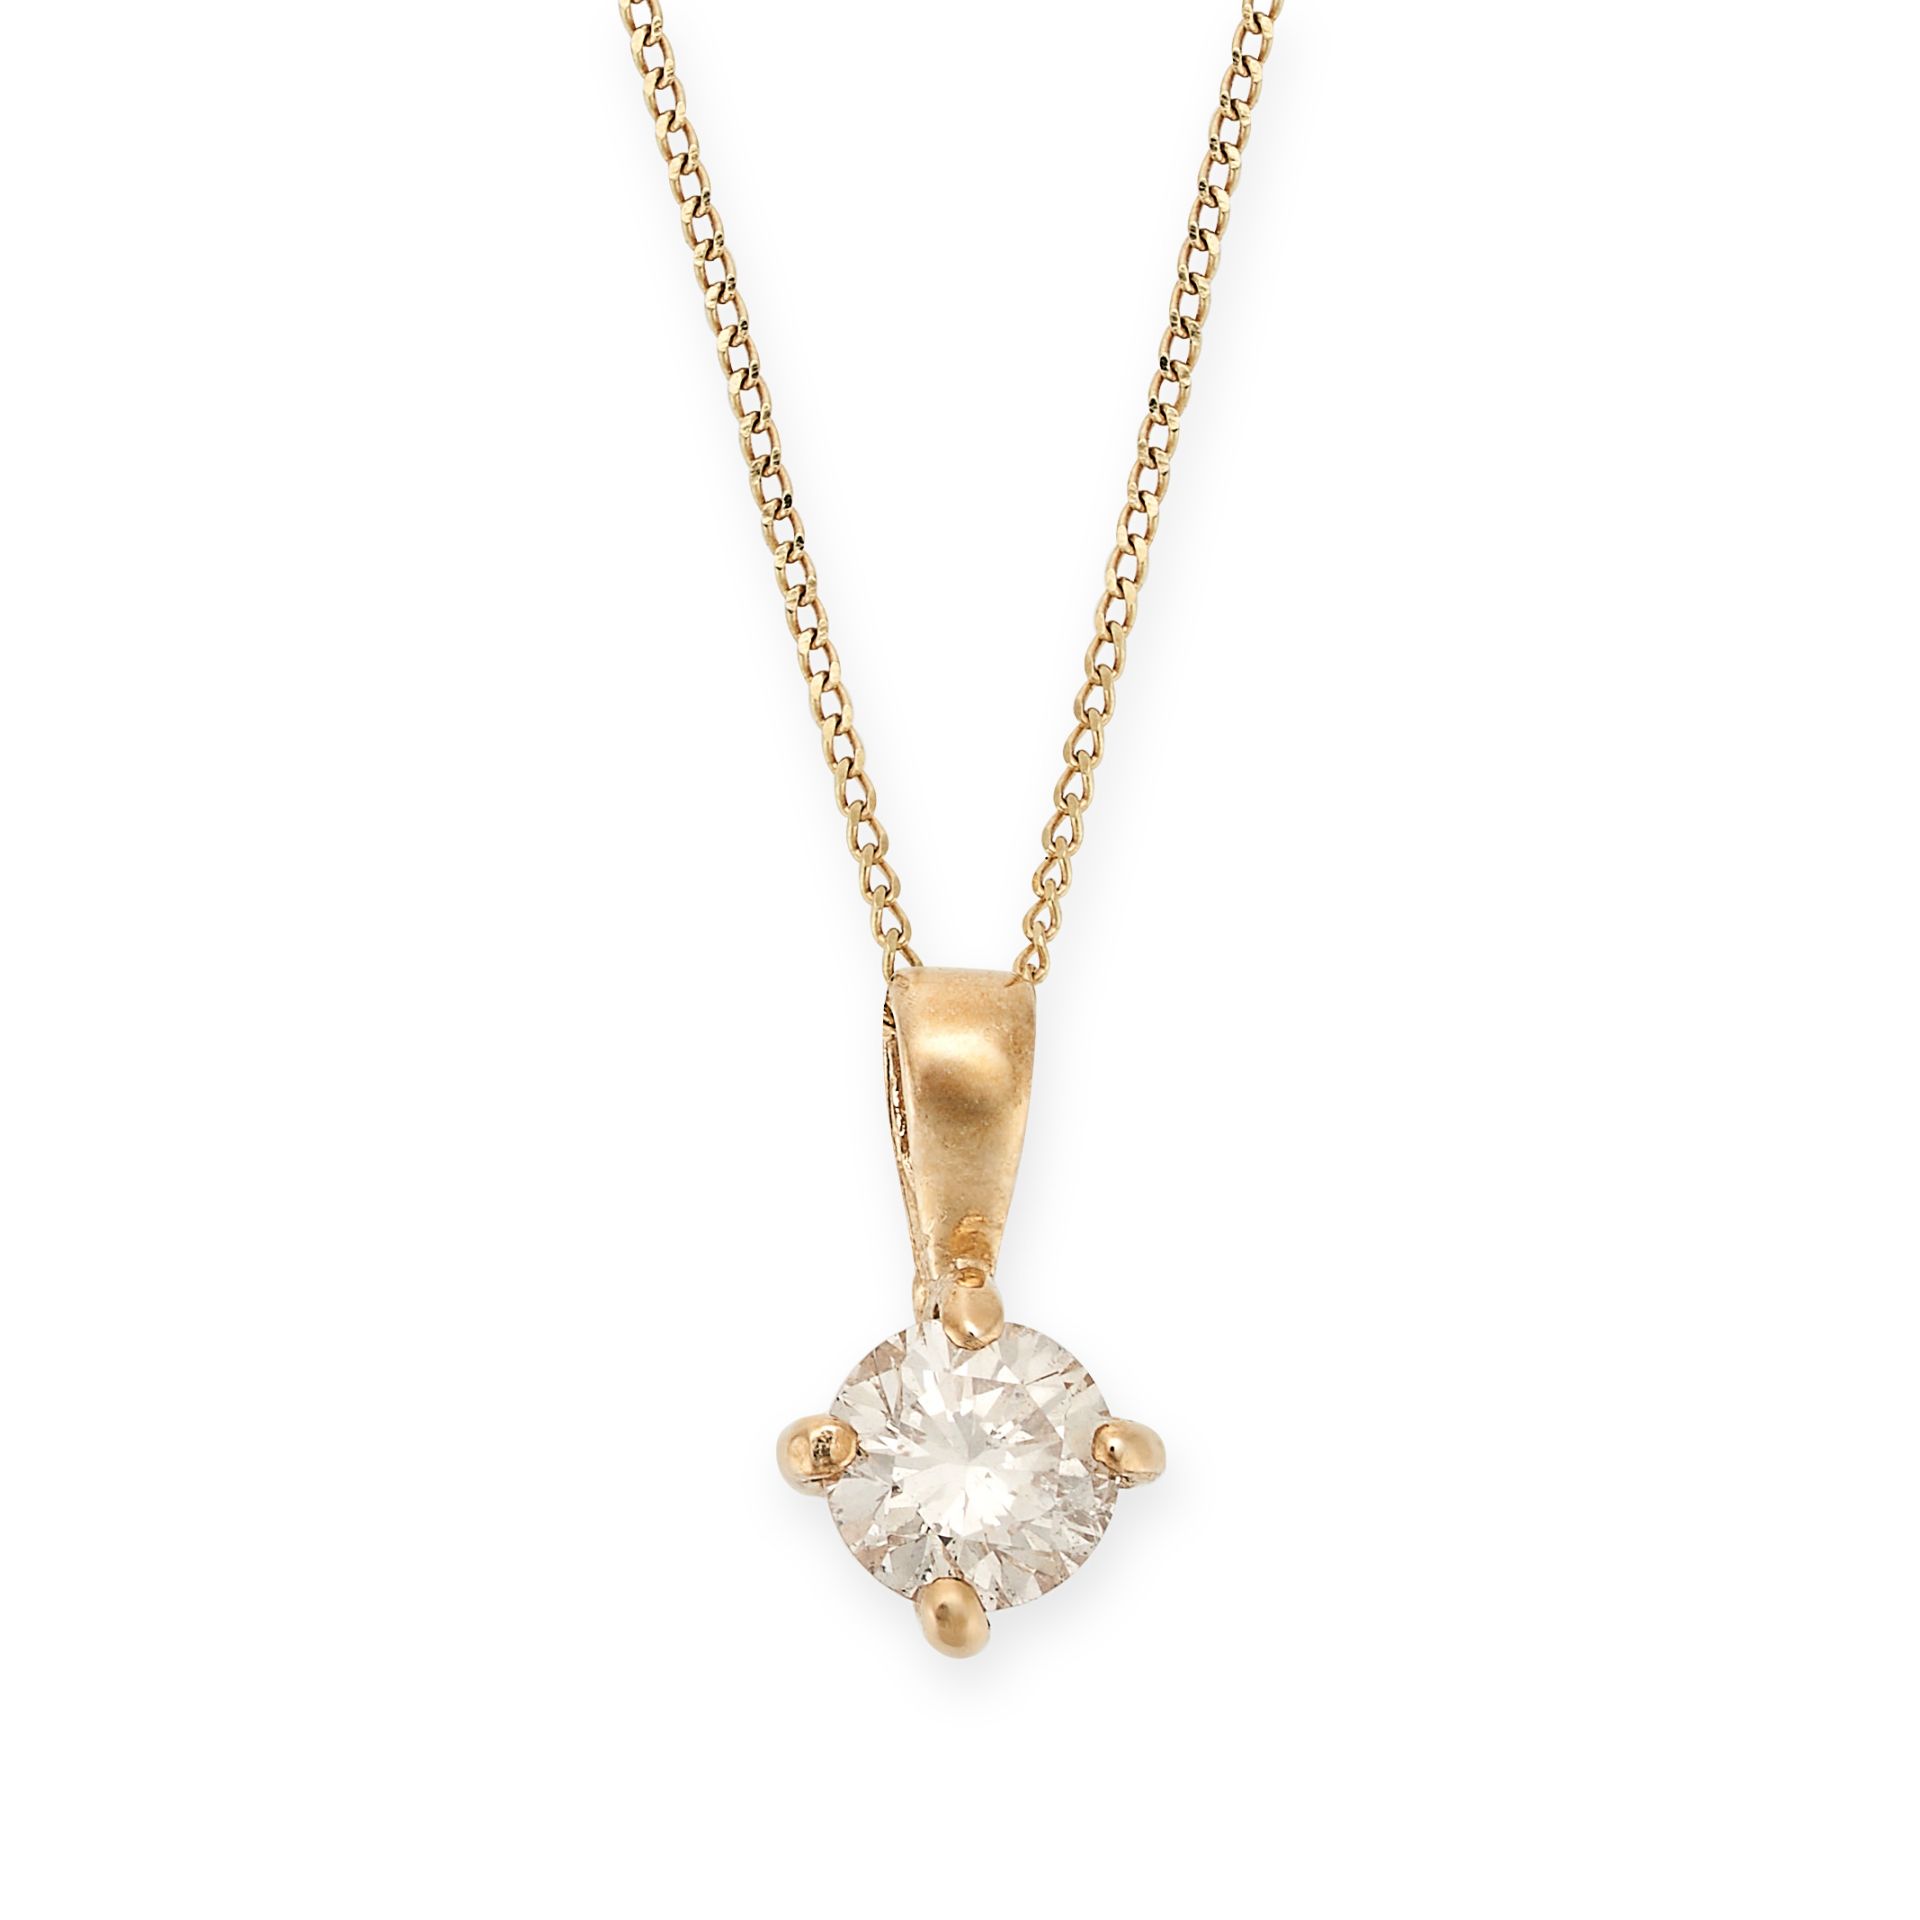 A SOLITAIRE DIAMOND PENDANT AND CHAIN in 9ct yellow gold, set with a round brilliant cut diamond